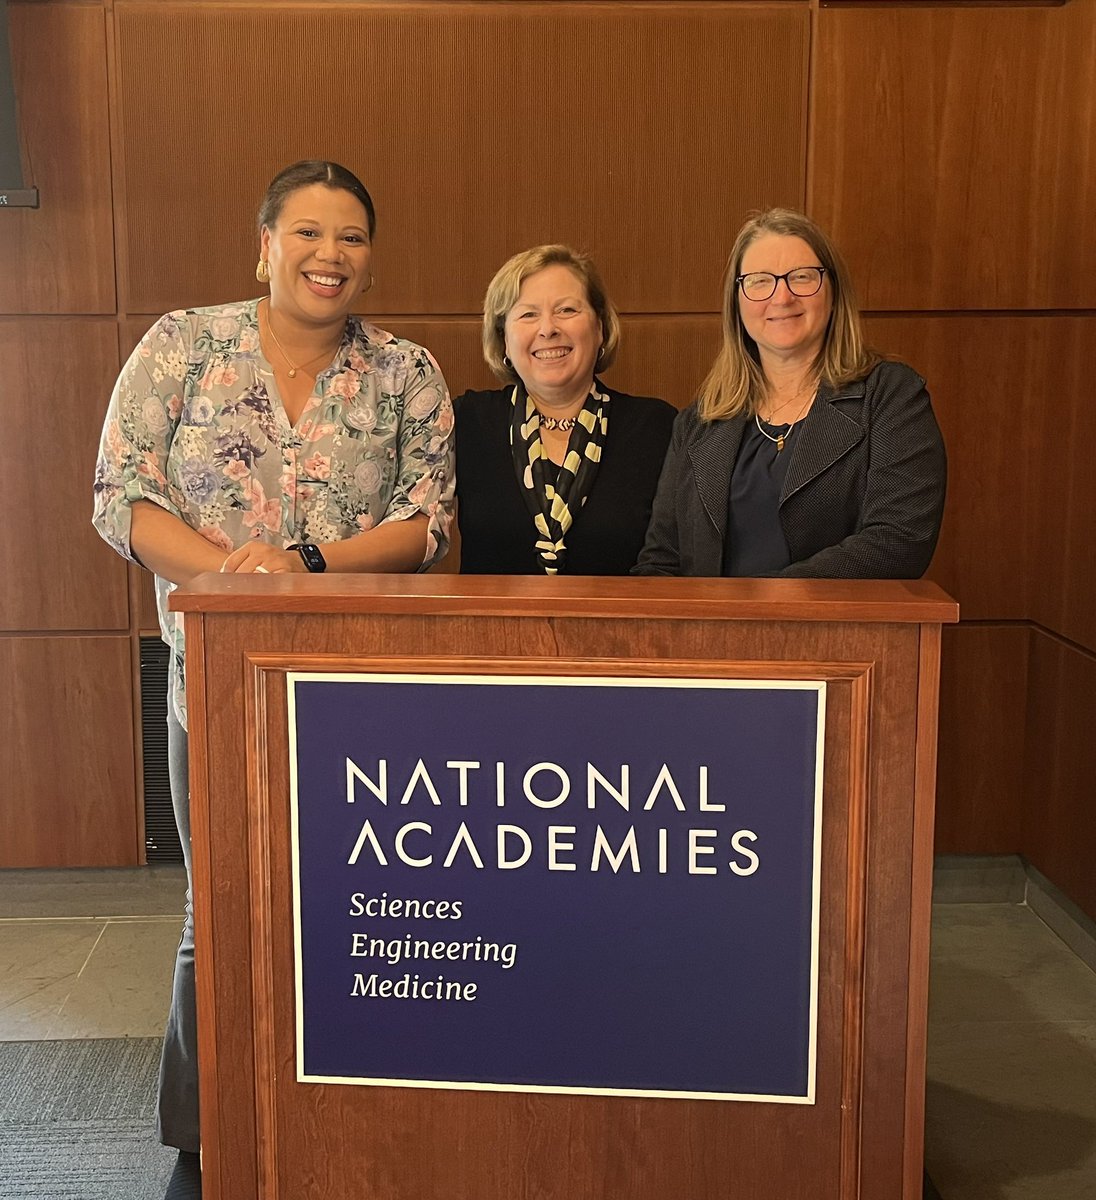 Amazing to be with the incomparable @dr_imariwalker and @JambeckResearch at the @theNASEM to talk about #plasticpollution - and what we can do together to end it!